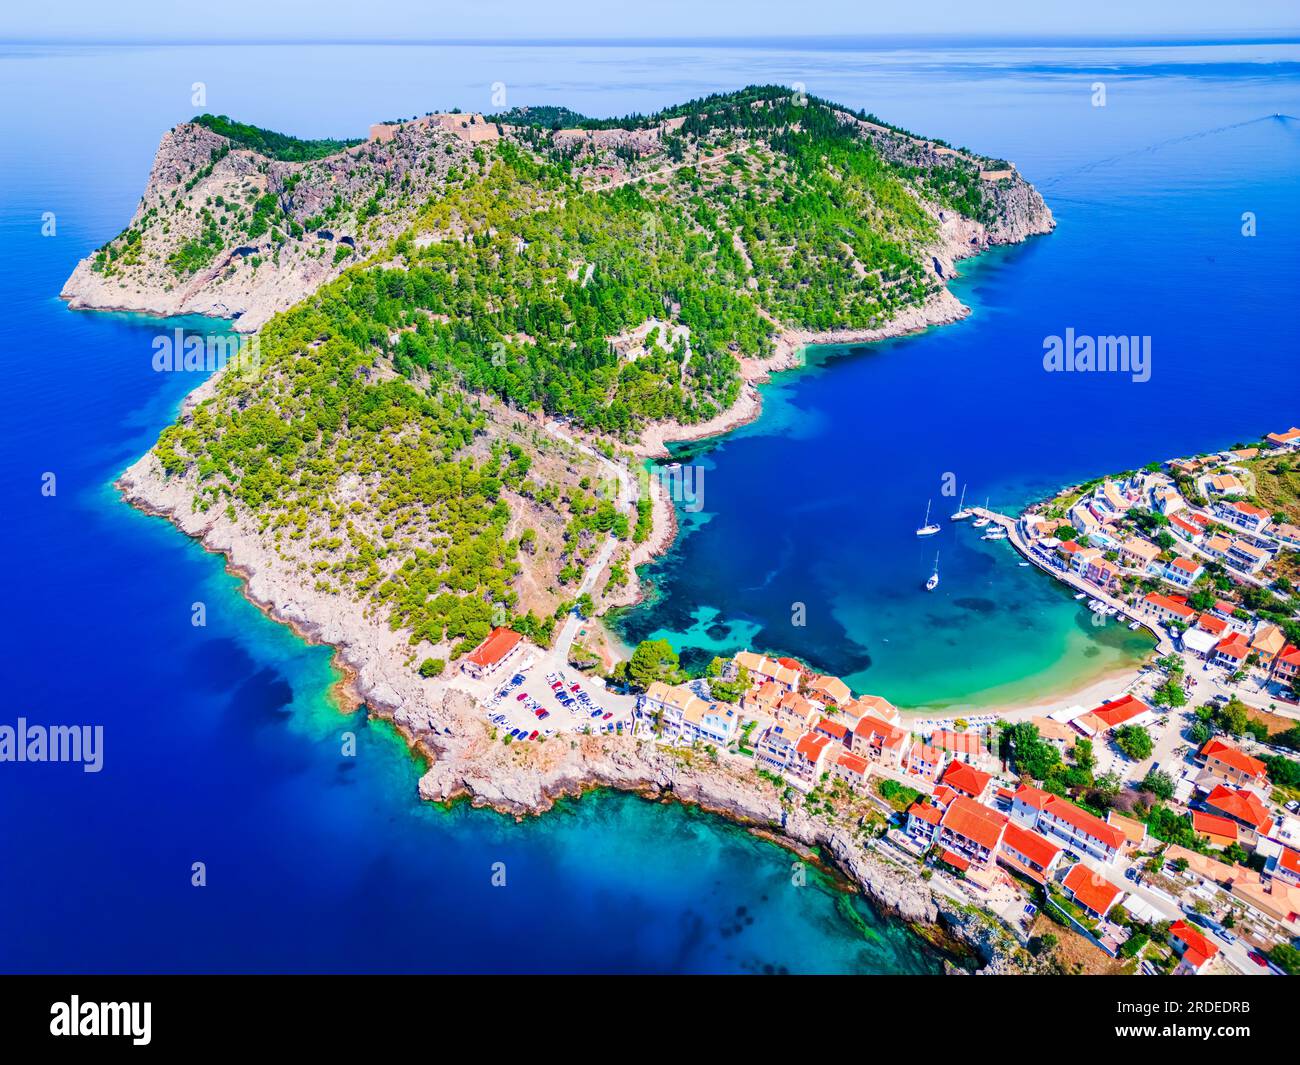 Assos, Greece. Picturesque village, colorful houses and turquoise colored bay. Idyllic Kefalonia, Ionian islands aerial view. Stock Photo